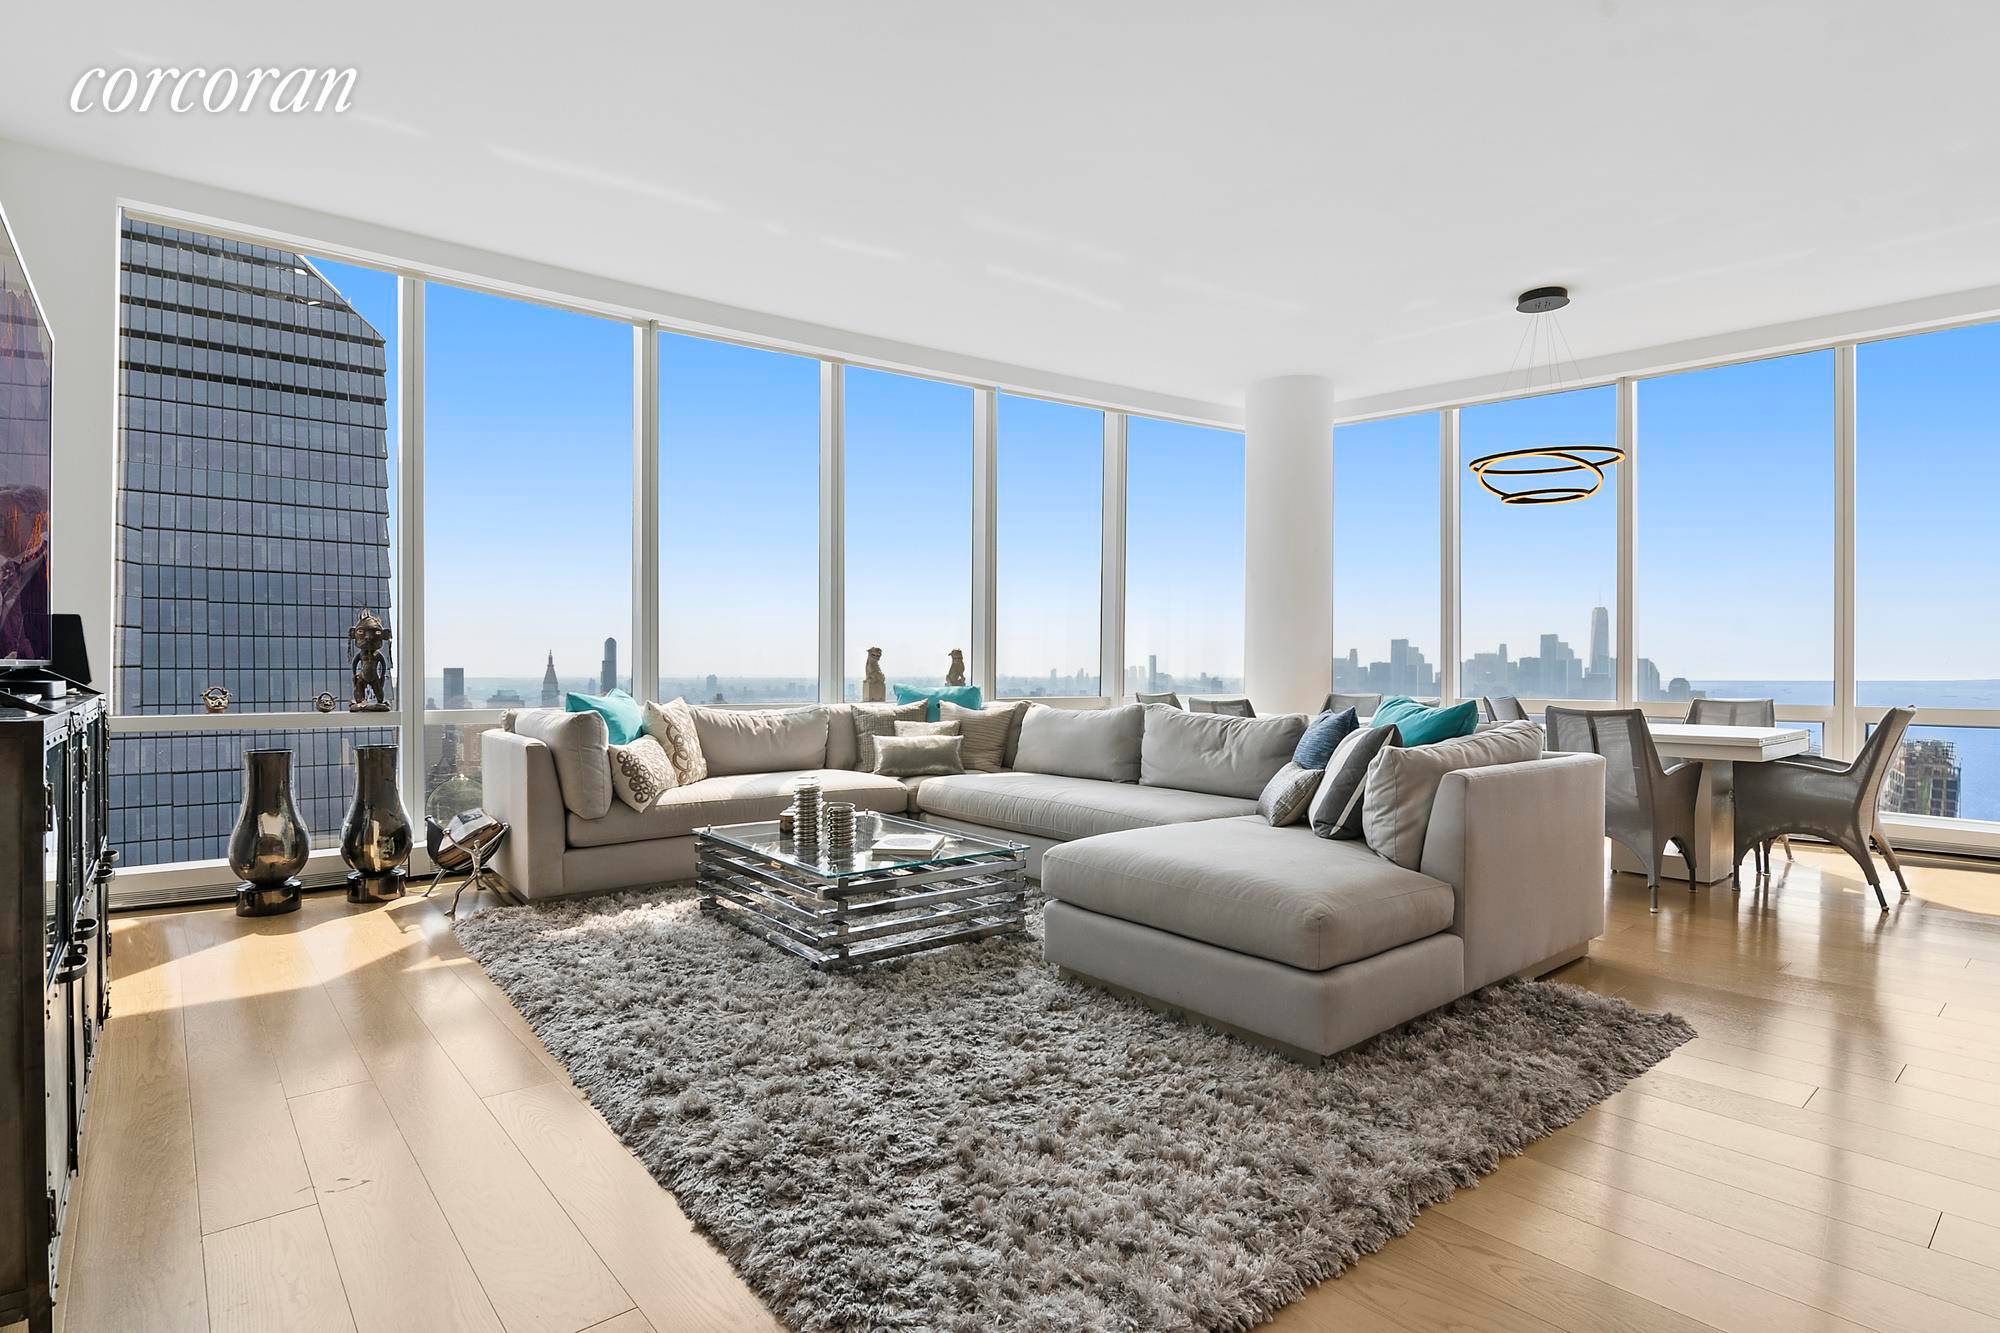 Sweeping Panoramas at Residence 71A Introducing 71A, a one of a kind home boasting iconic views of the Hudson River, Freedom Tower, Statue of Liberty, and Atlantic Ocean.